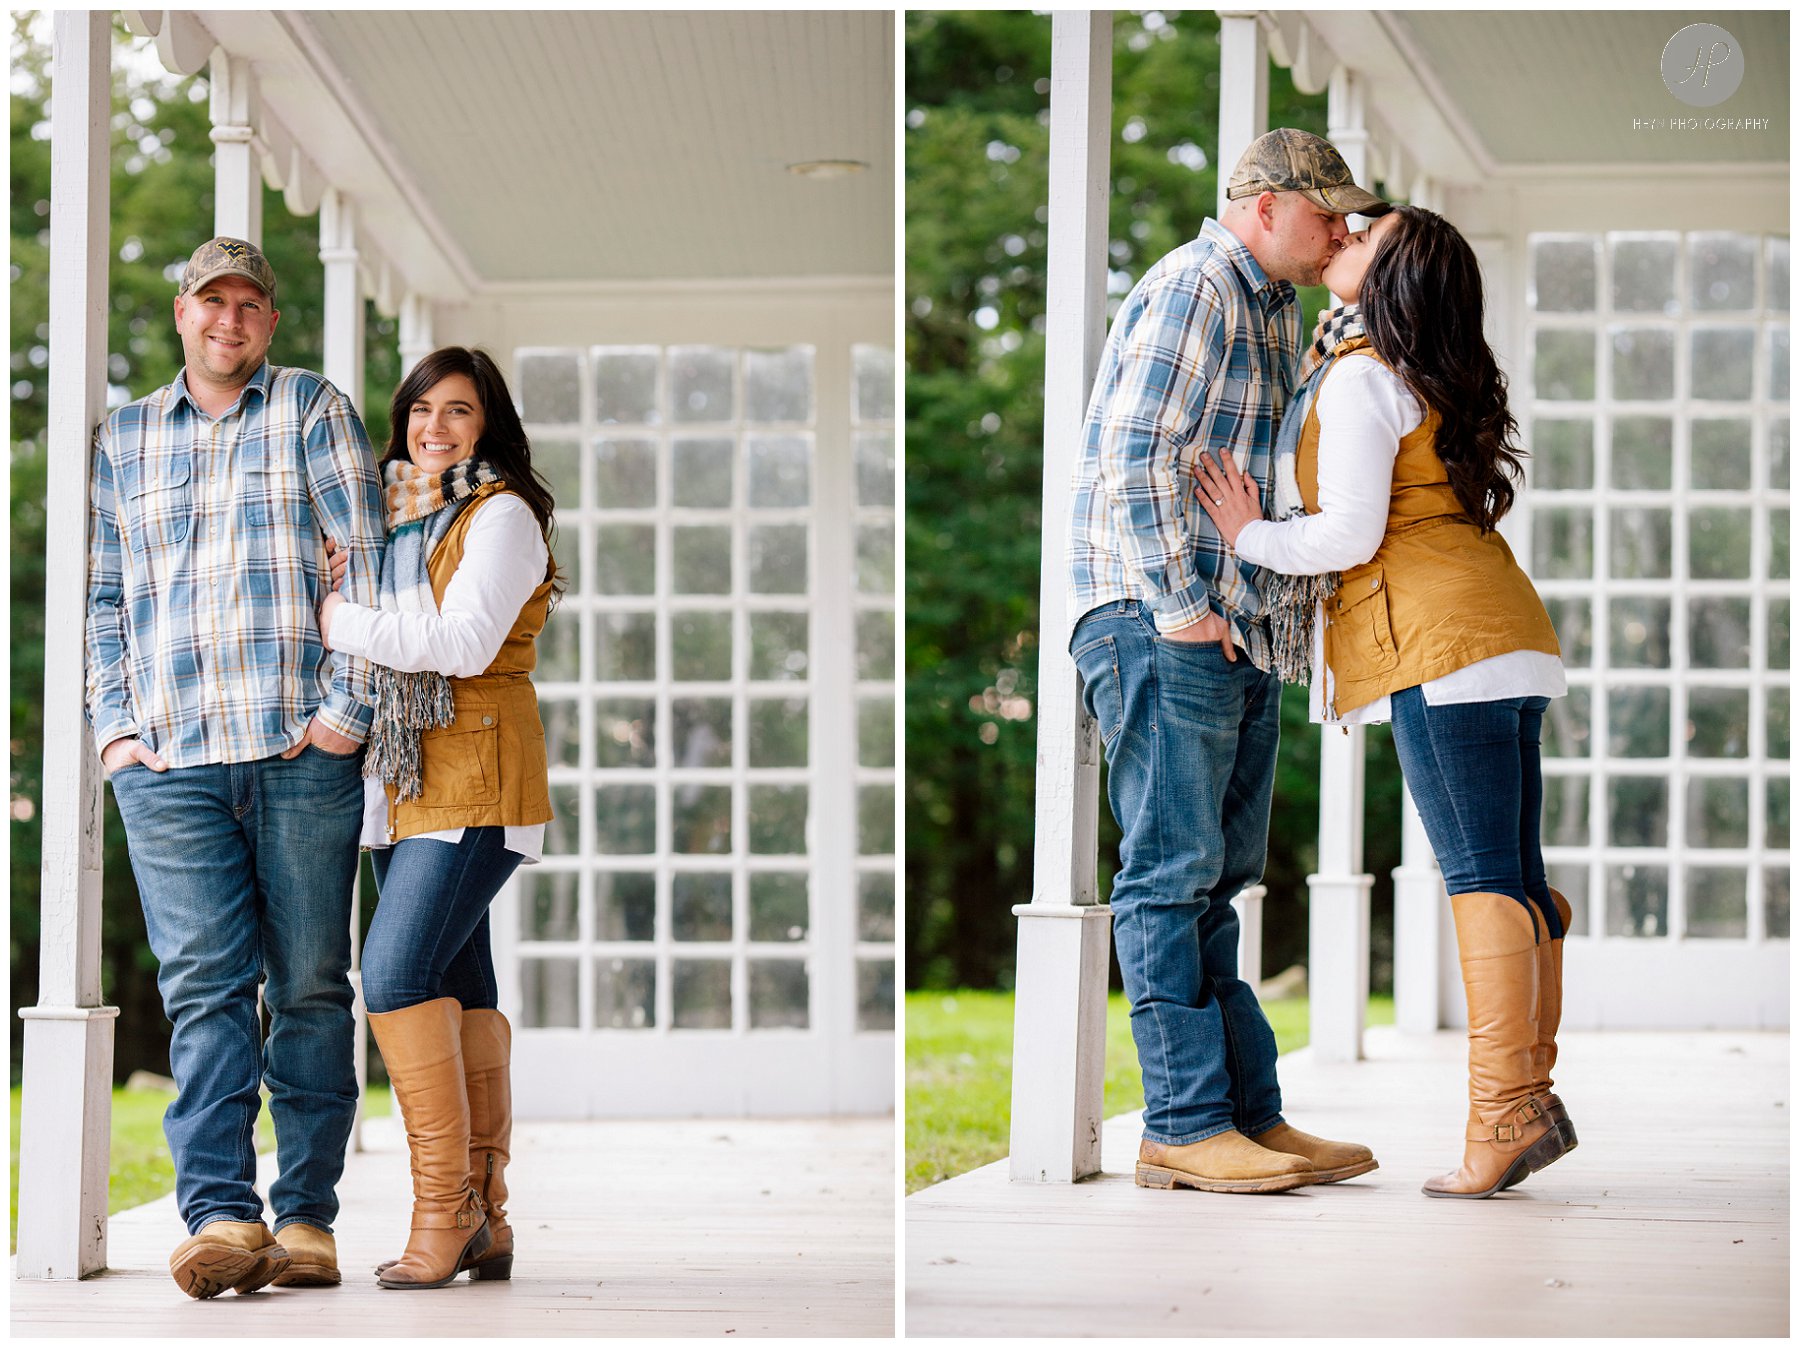  couple on porch bayonet farm engagement session in new jersey